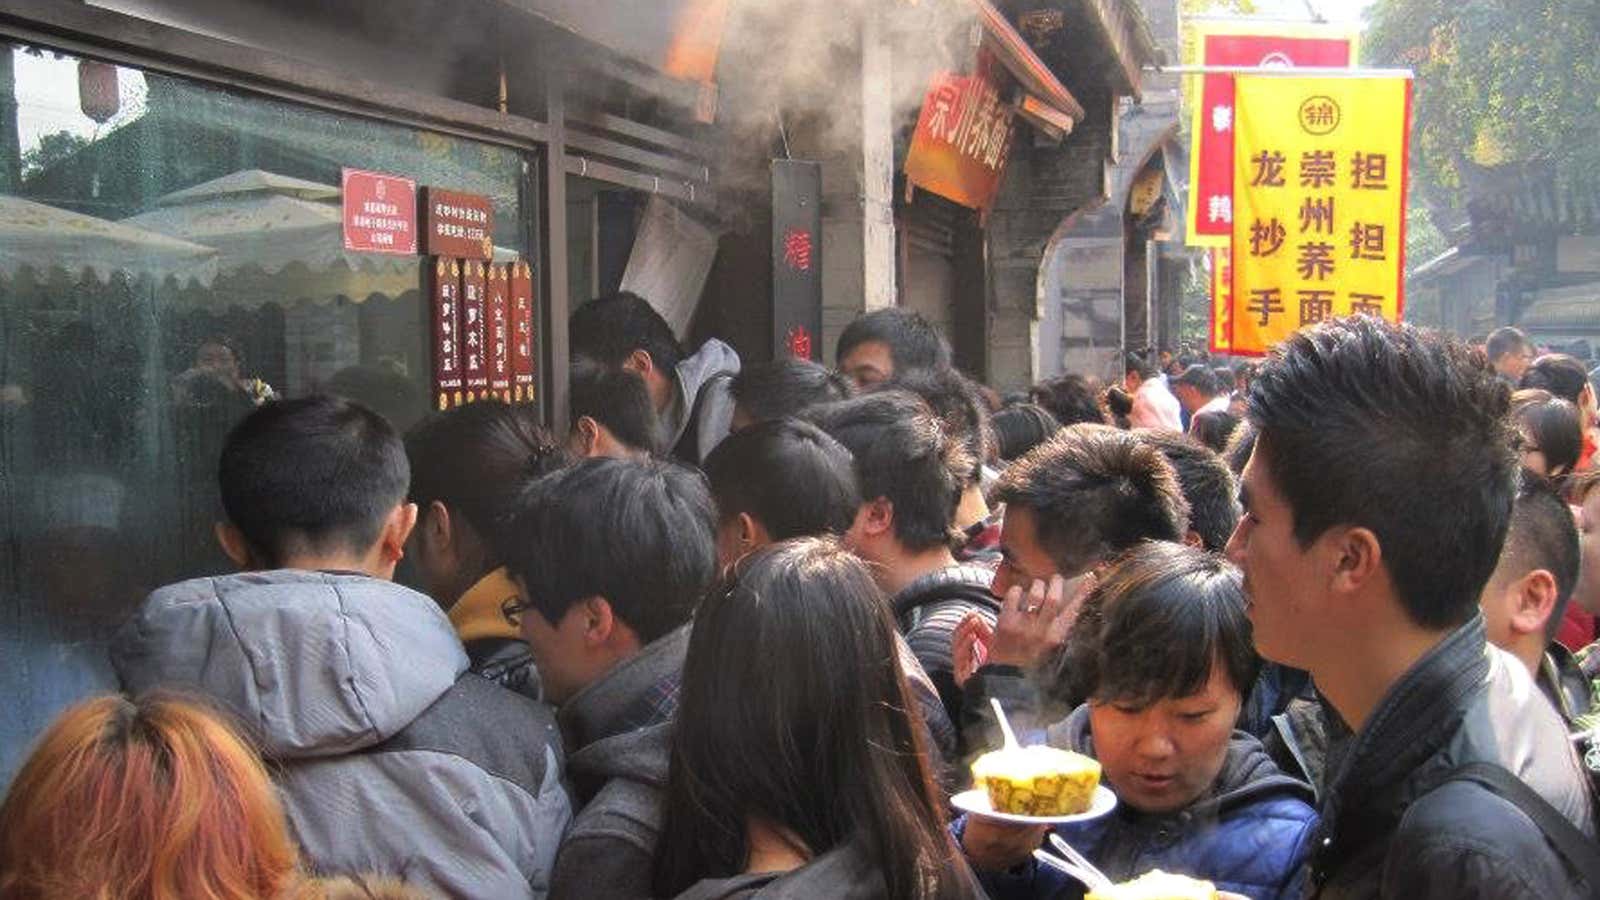 Just trying to be part of the crowd at a food stall on Jinli Pedestrian Street in Chengdu, China.